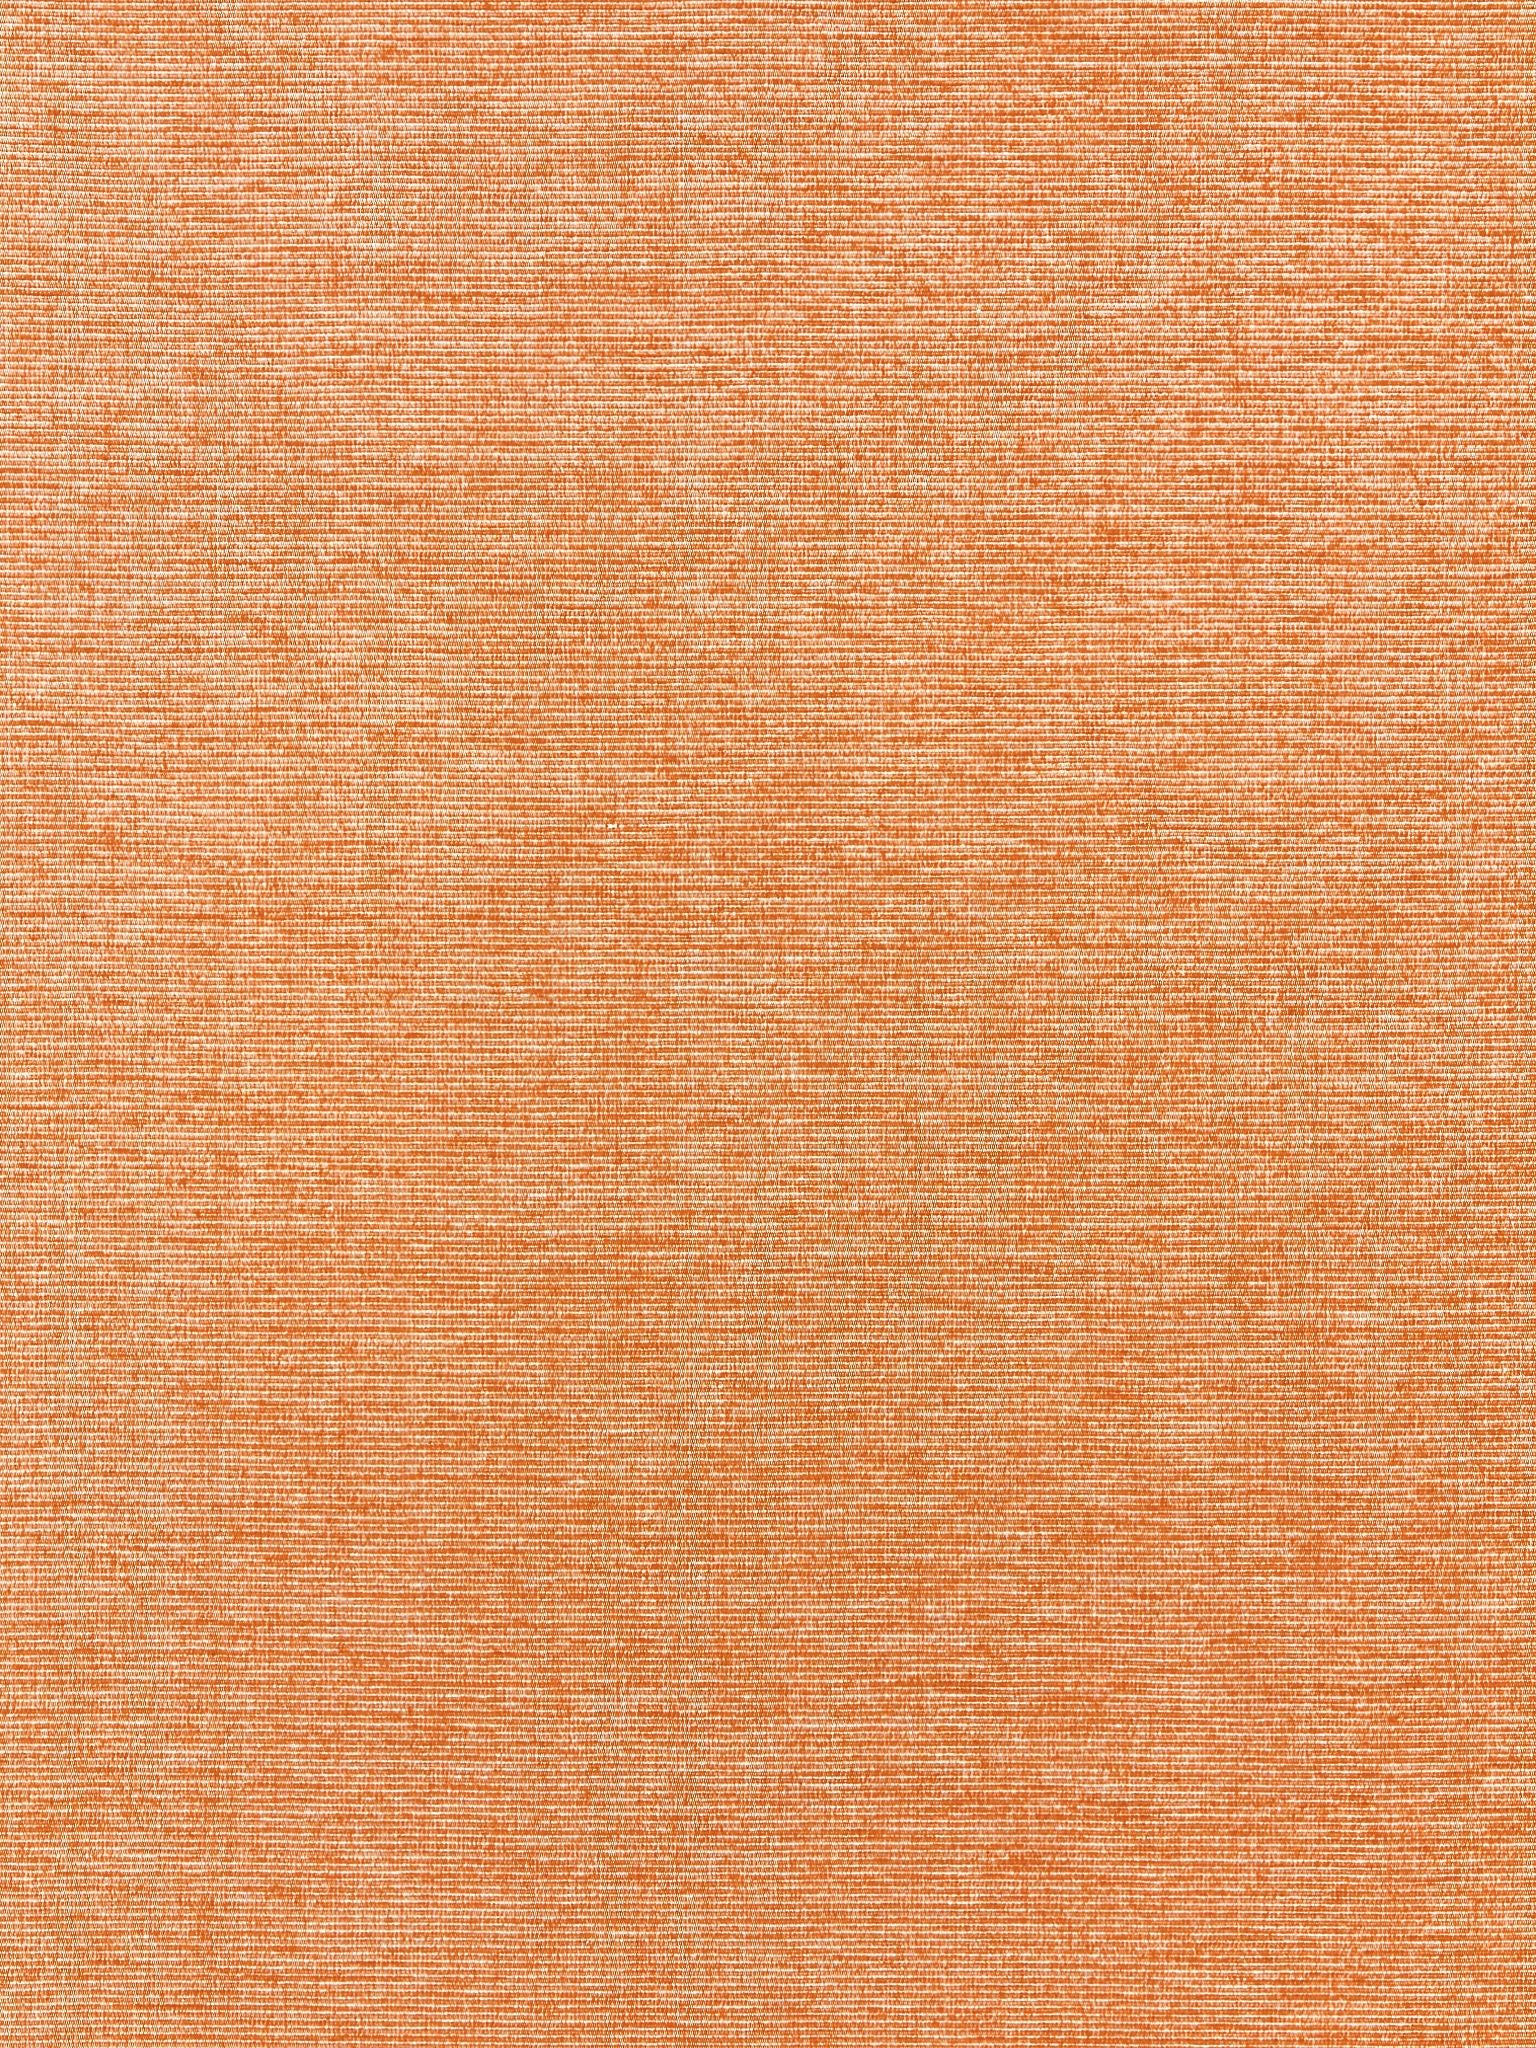 Thompson Chenille fabric in mandarin color - pattern number BK 0003K65114 - by Scalamandre in the Old World Weavers collection